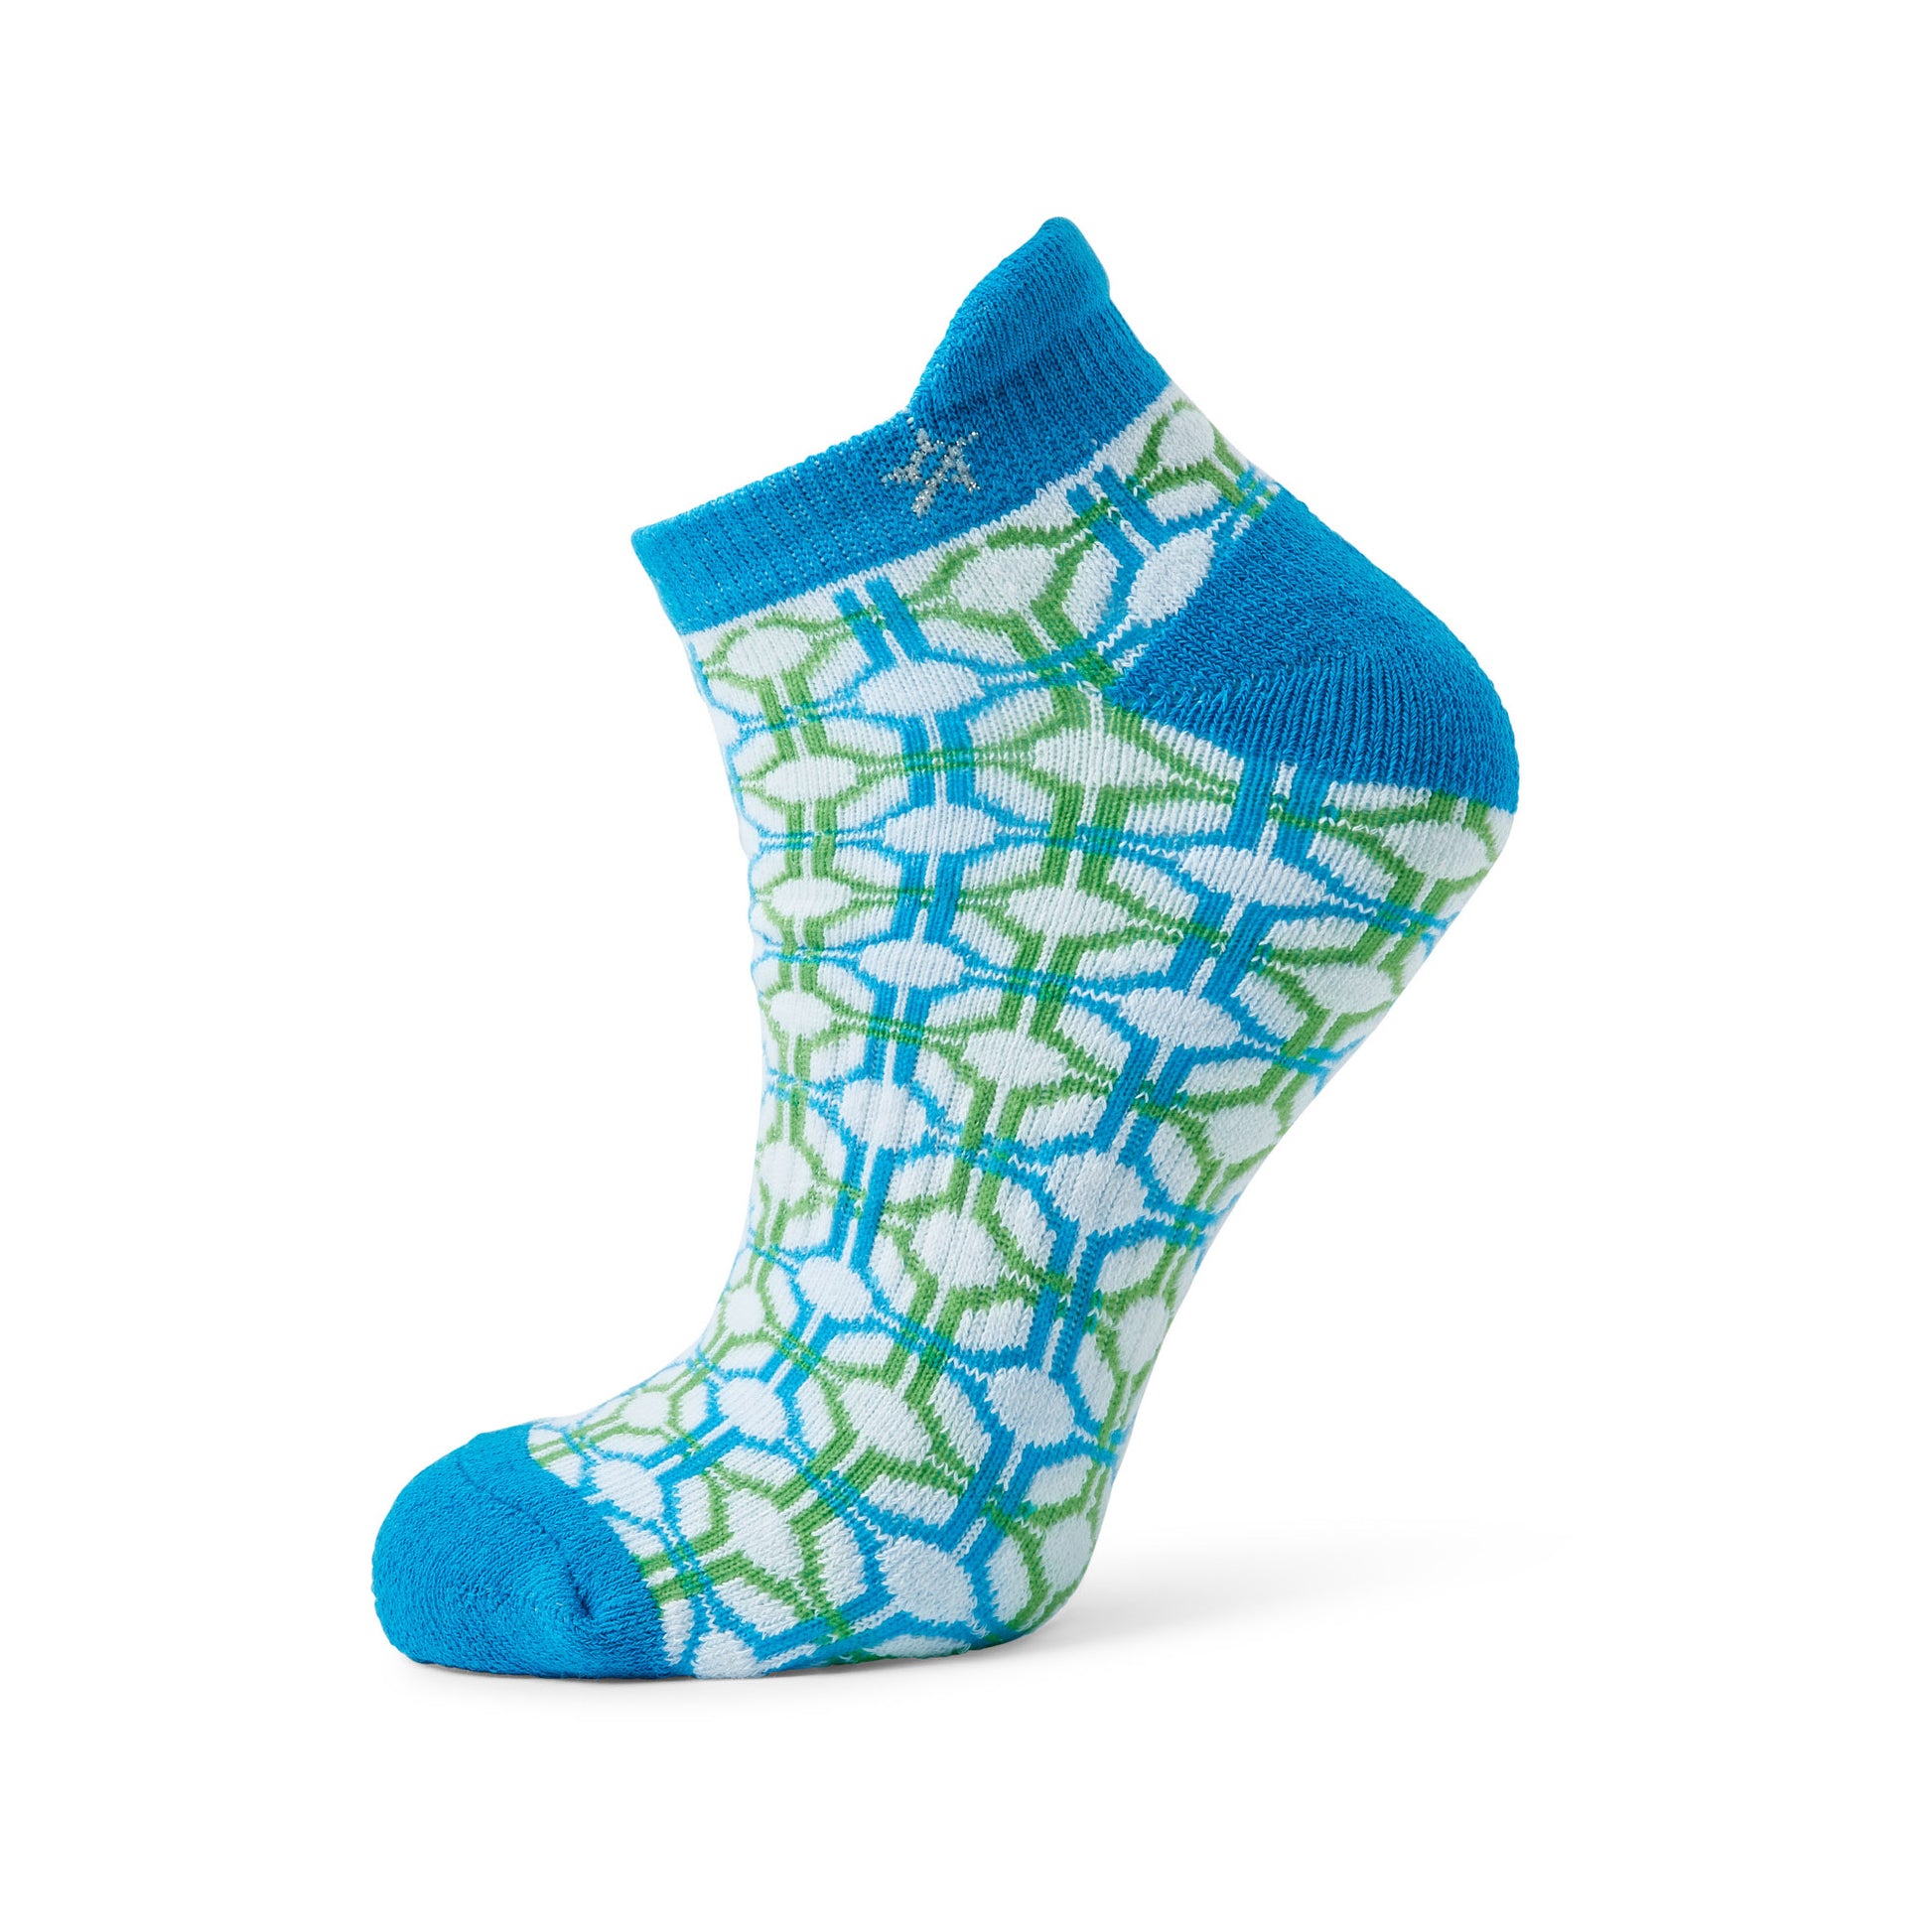 Swing Out Sister Ladies 2 Pair Cotton Socks in Dazzling Blue and Emerald